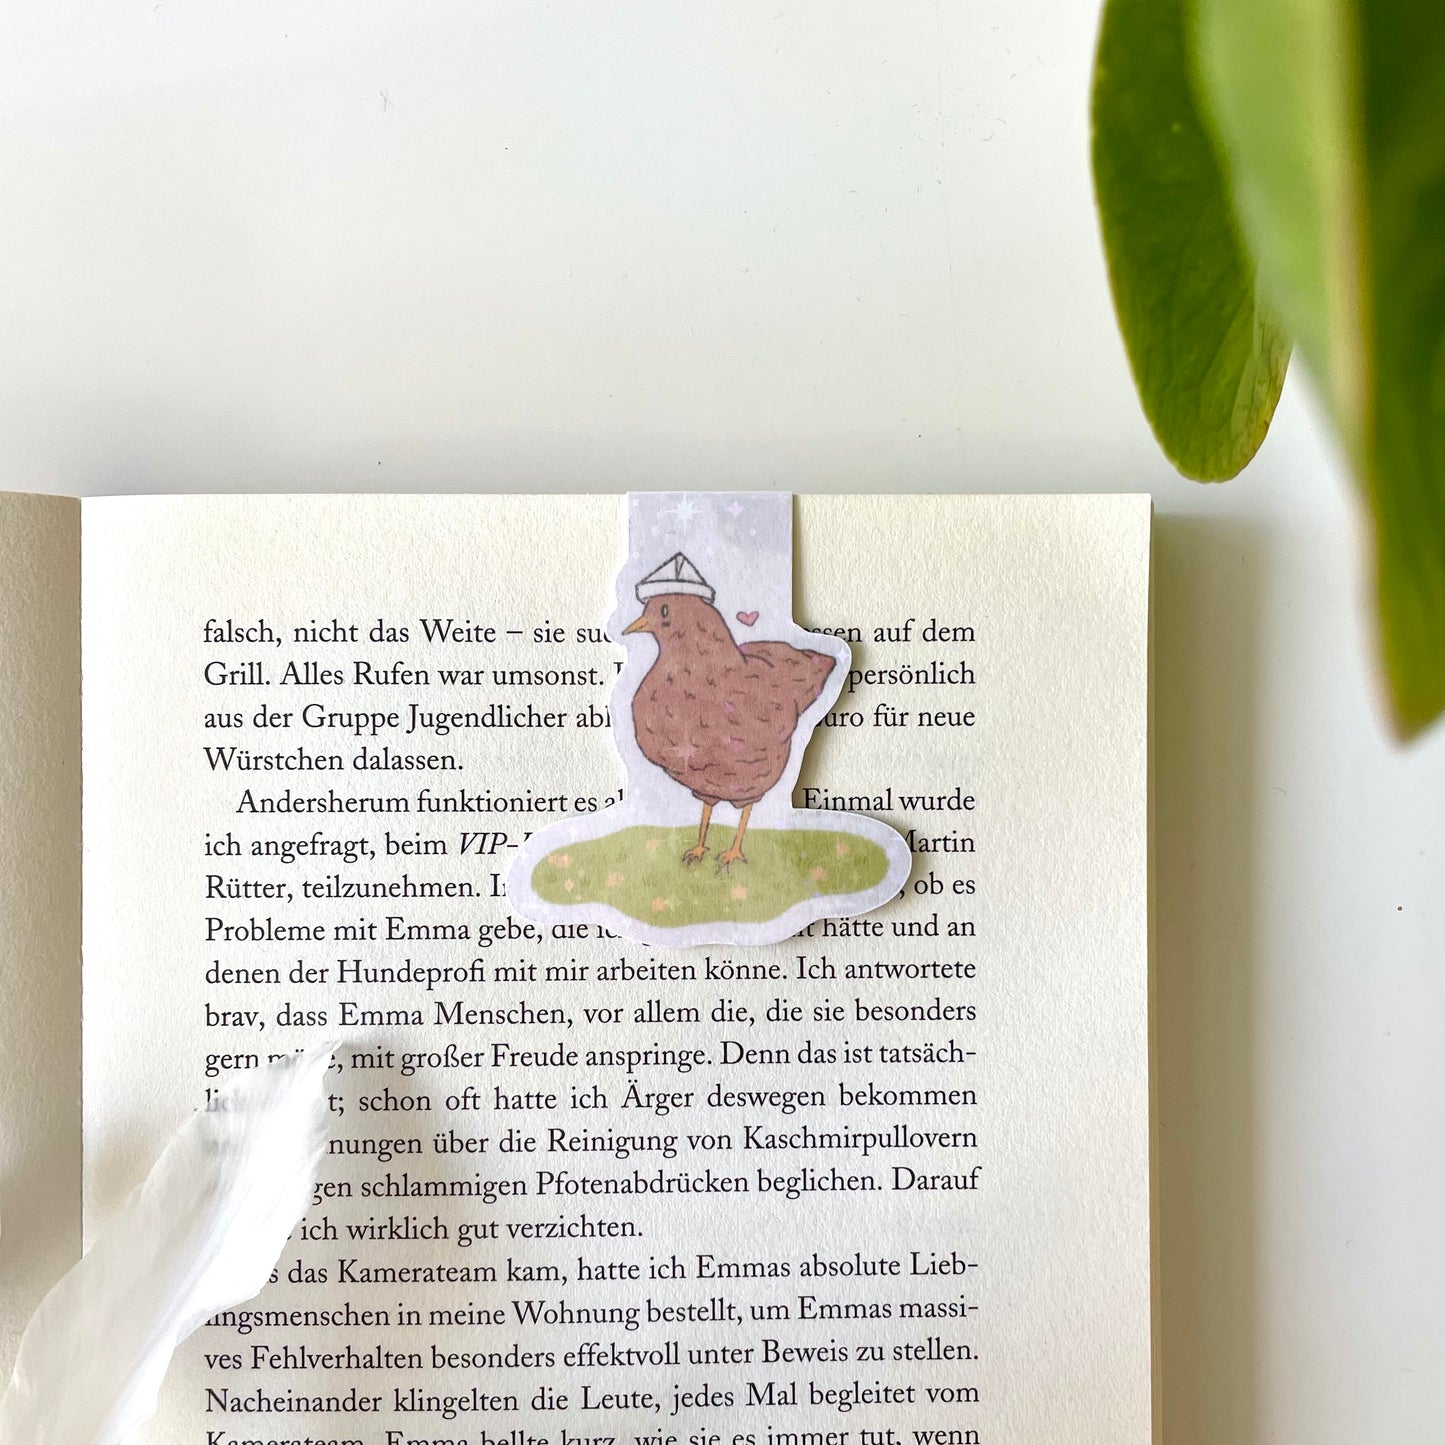 Chicken in Paper Hat Magnetic Bookmark